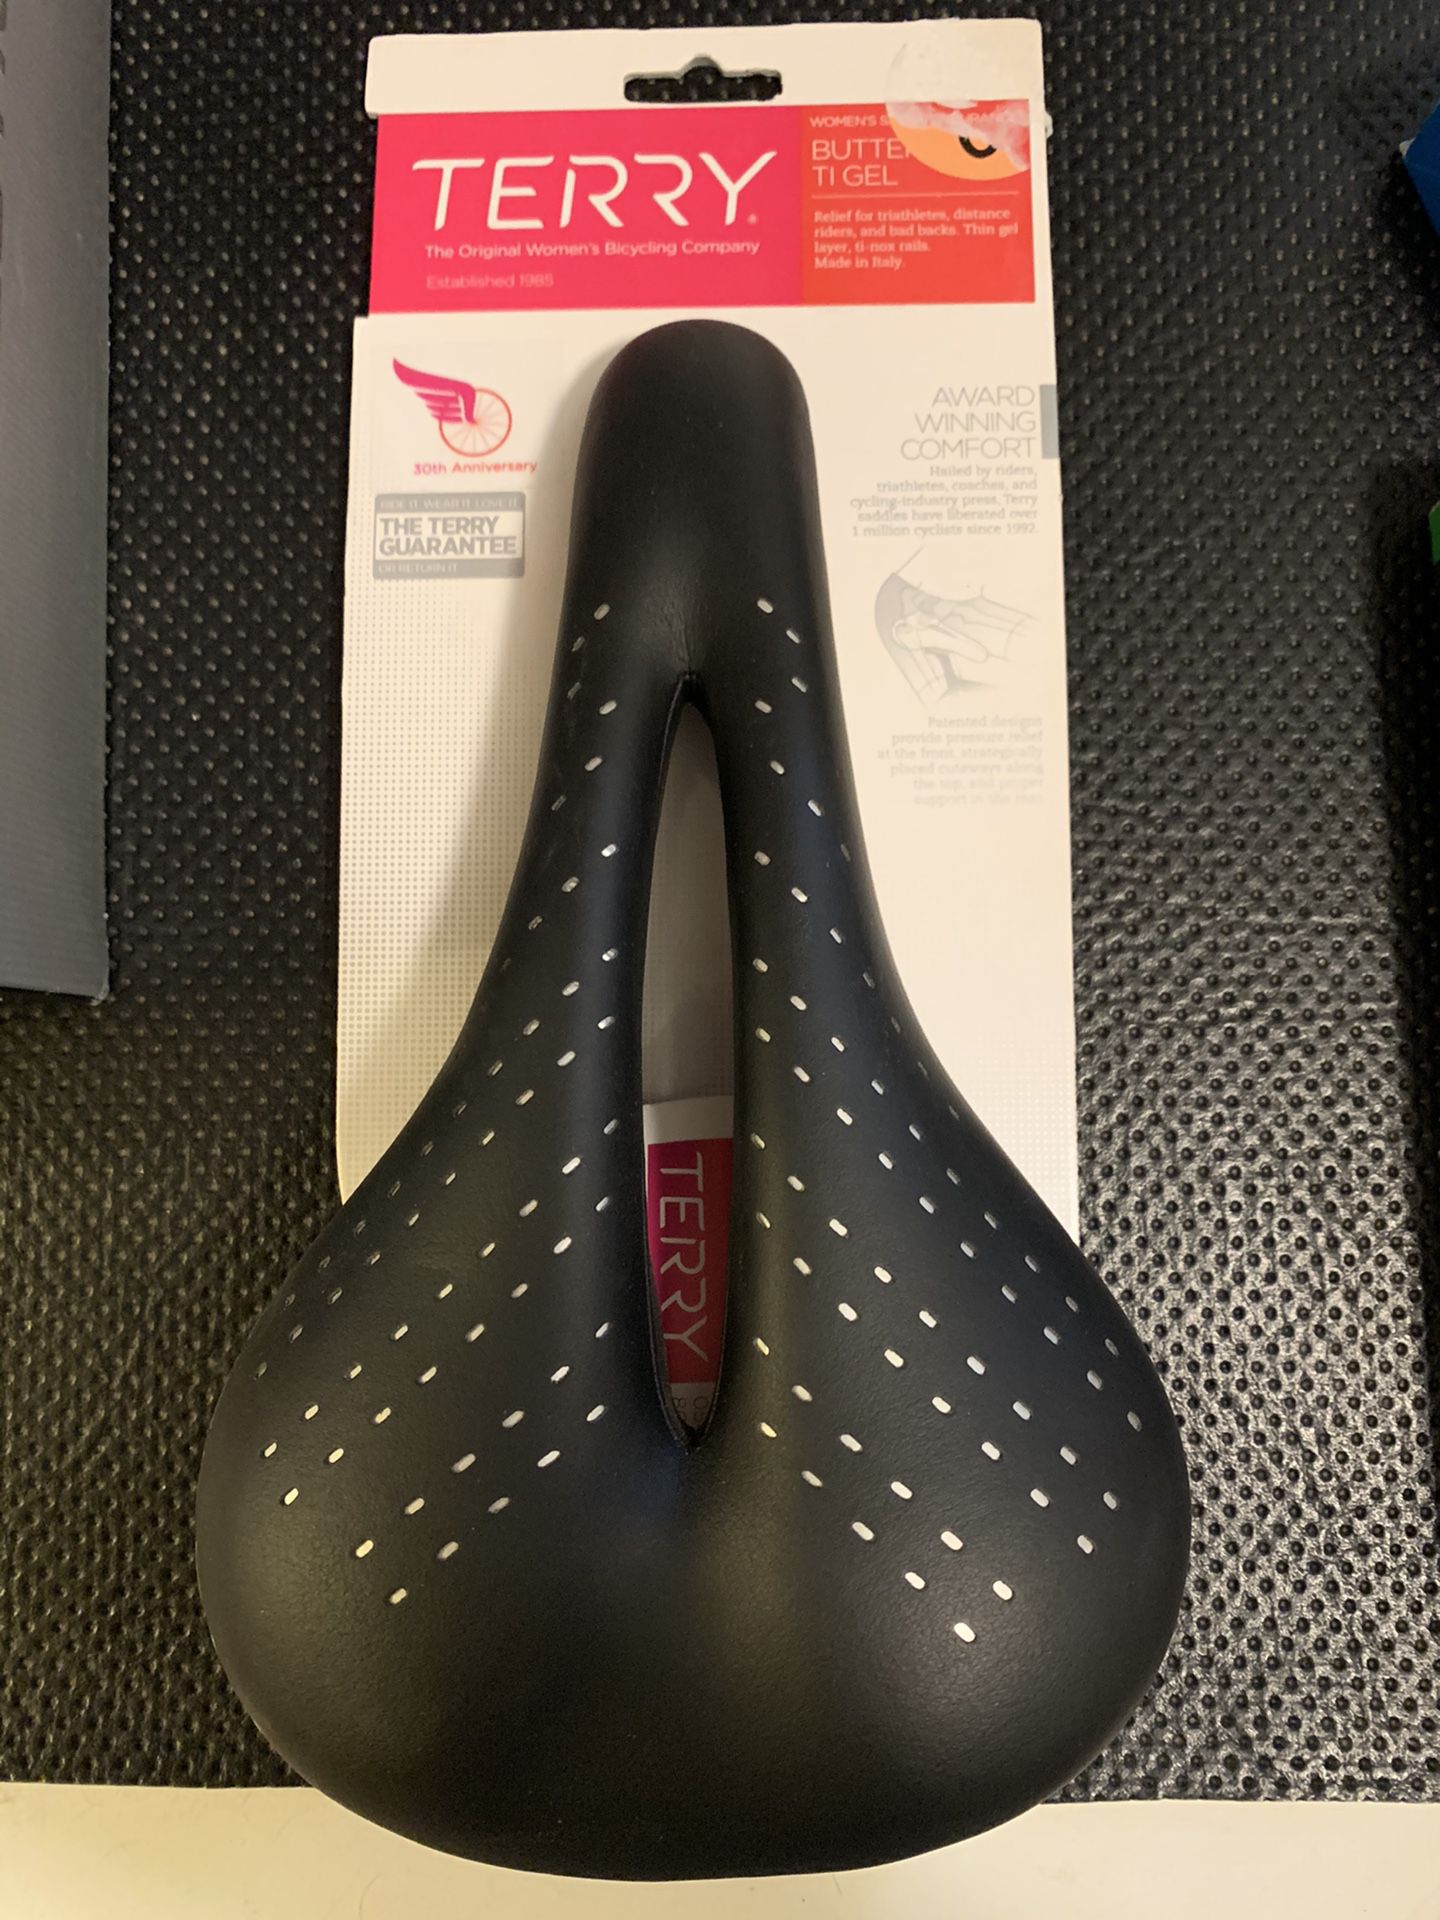 Terry butterfly ti gel women’s specific bicycle seat (new)